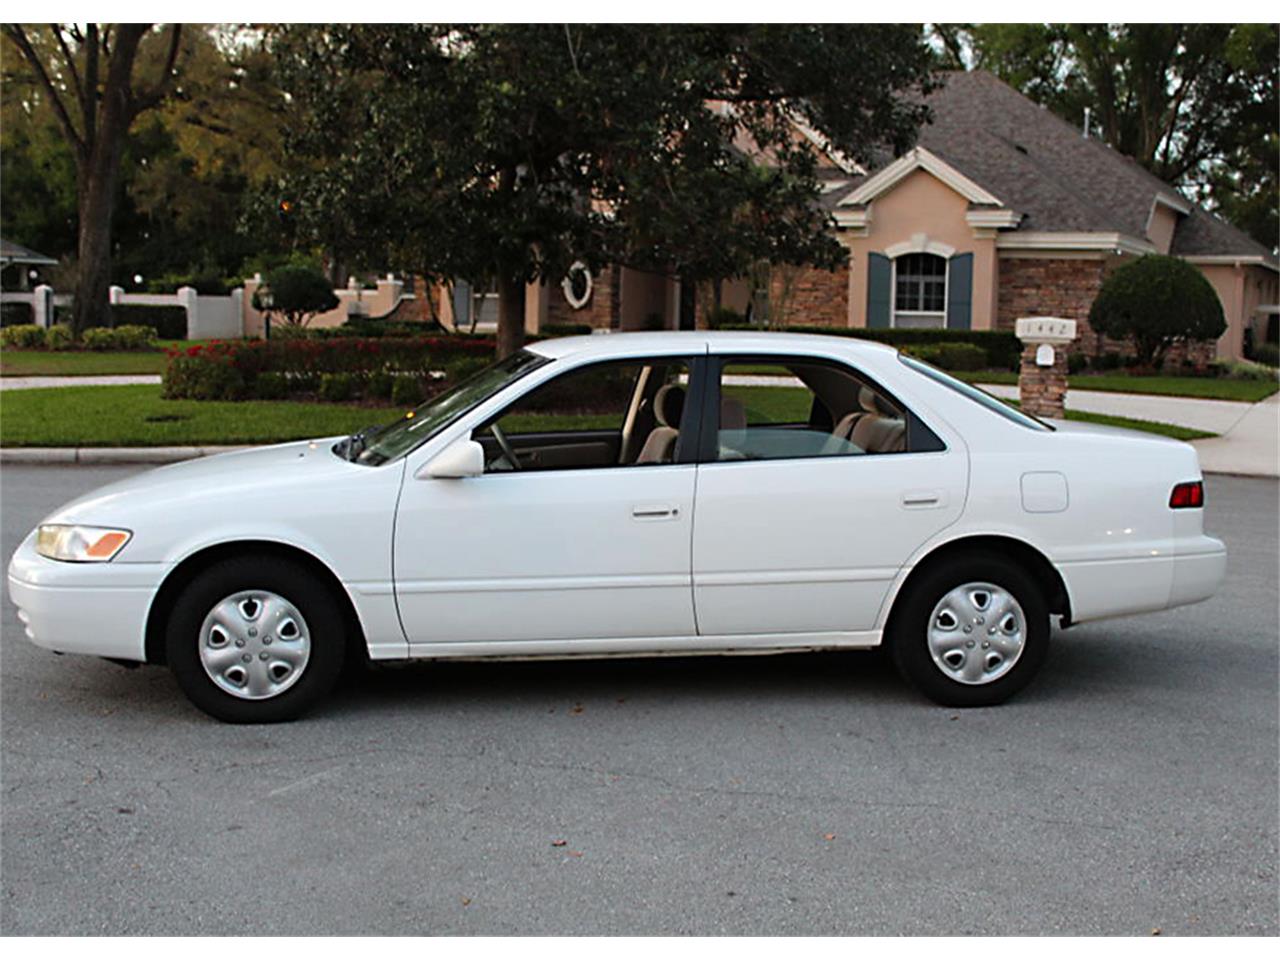 1999 Toyota Camry for sale in Lakeland, FL – photo 69